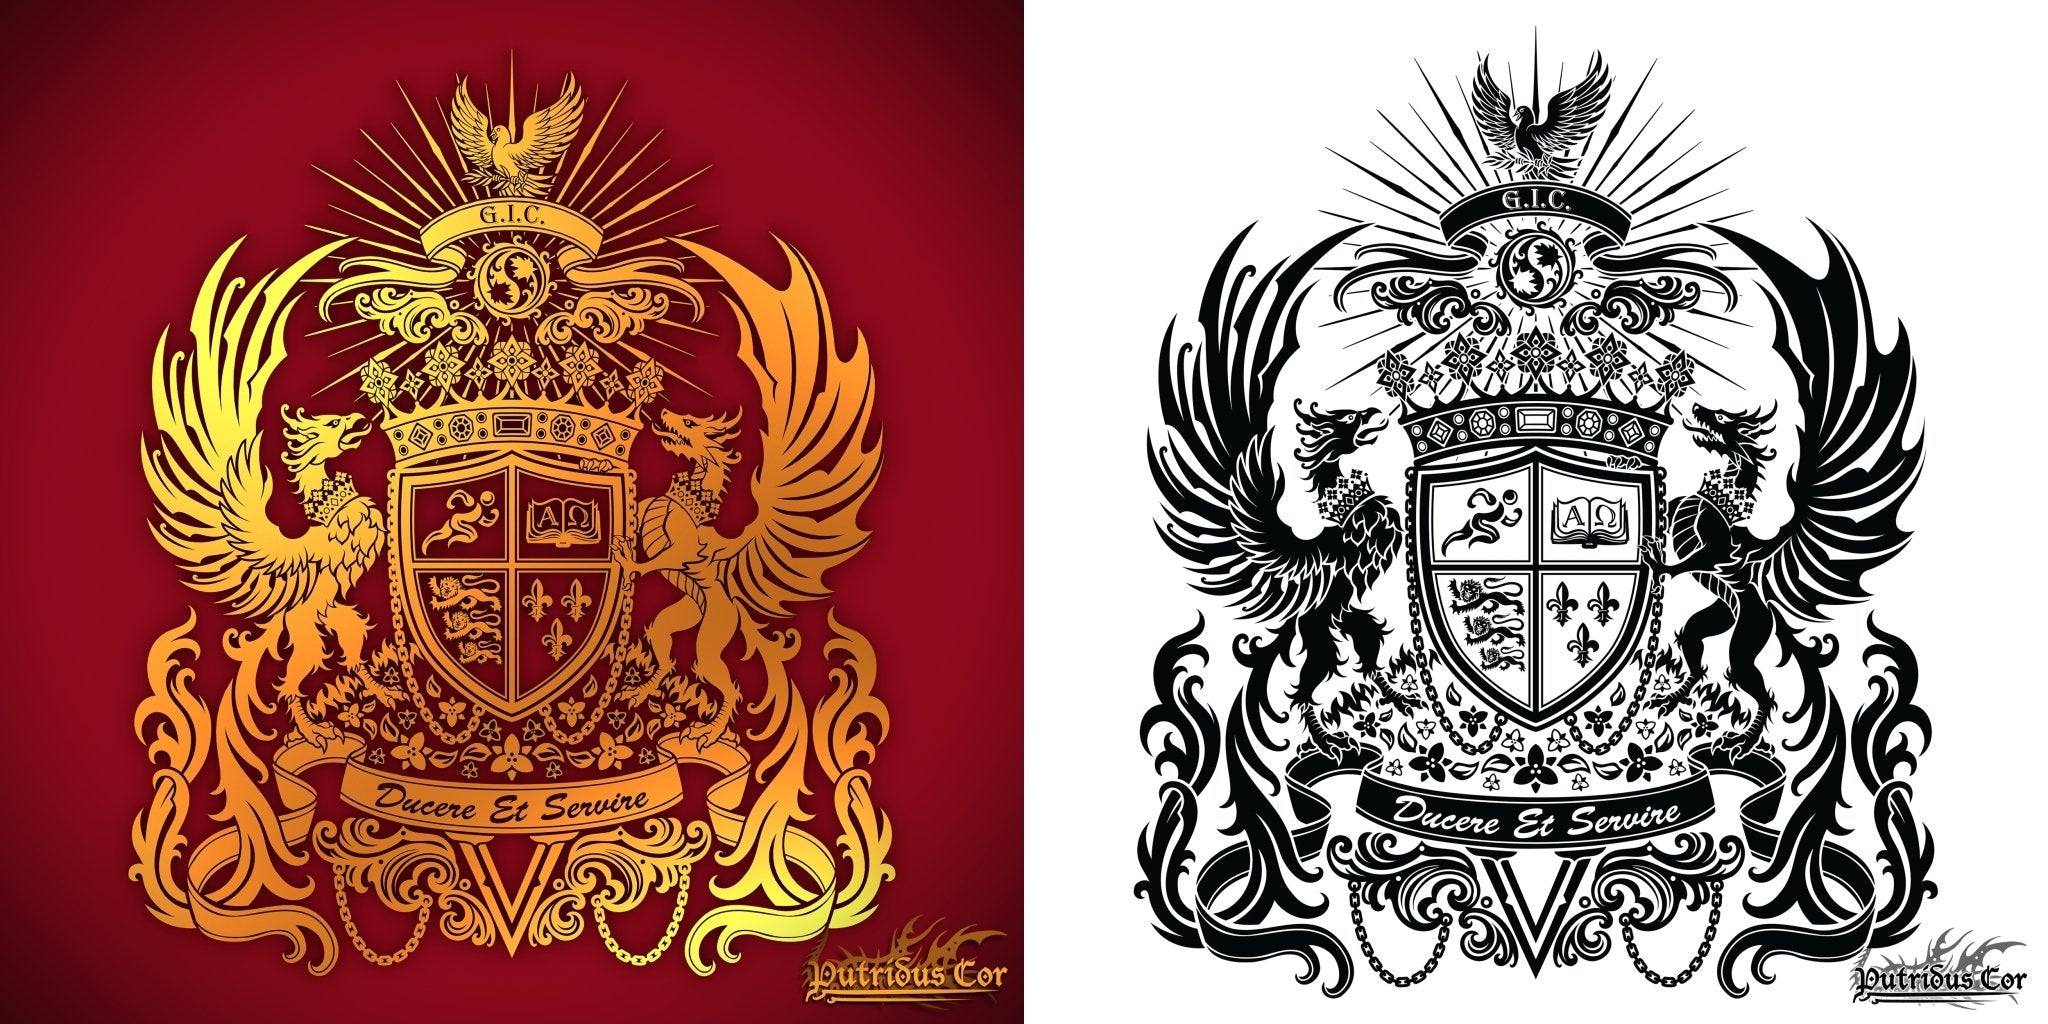 Custom Emblem Logo, Create a Personalized Coat of Arms, Design your own Family Crest or Heraldry Art - Abysm Internal